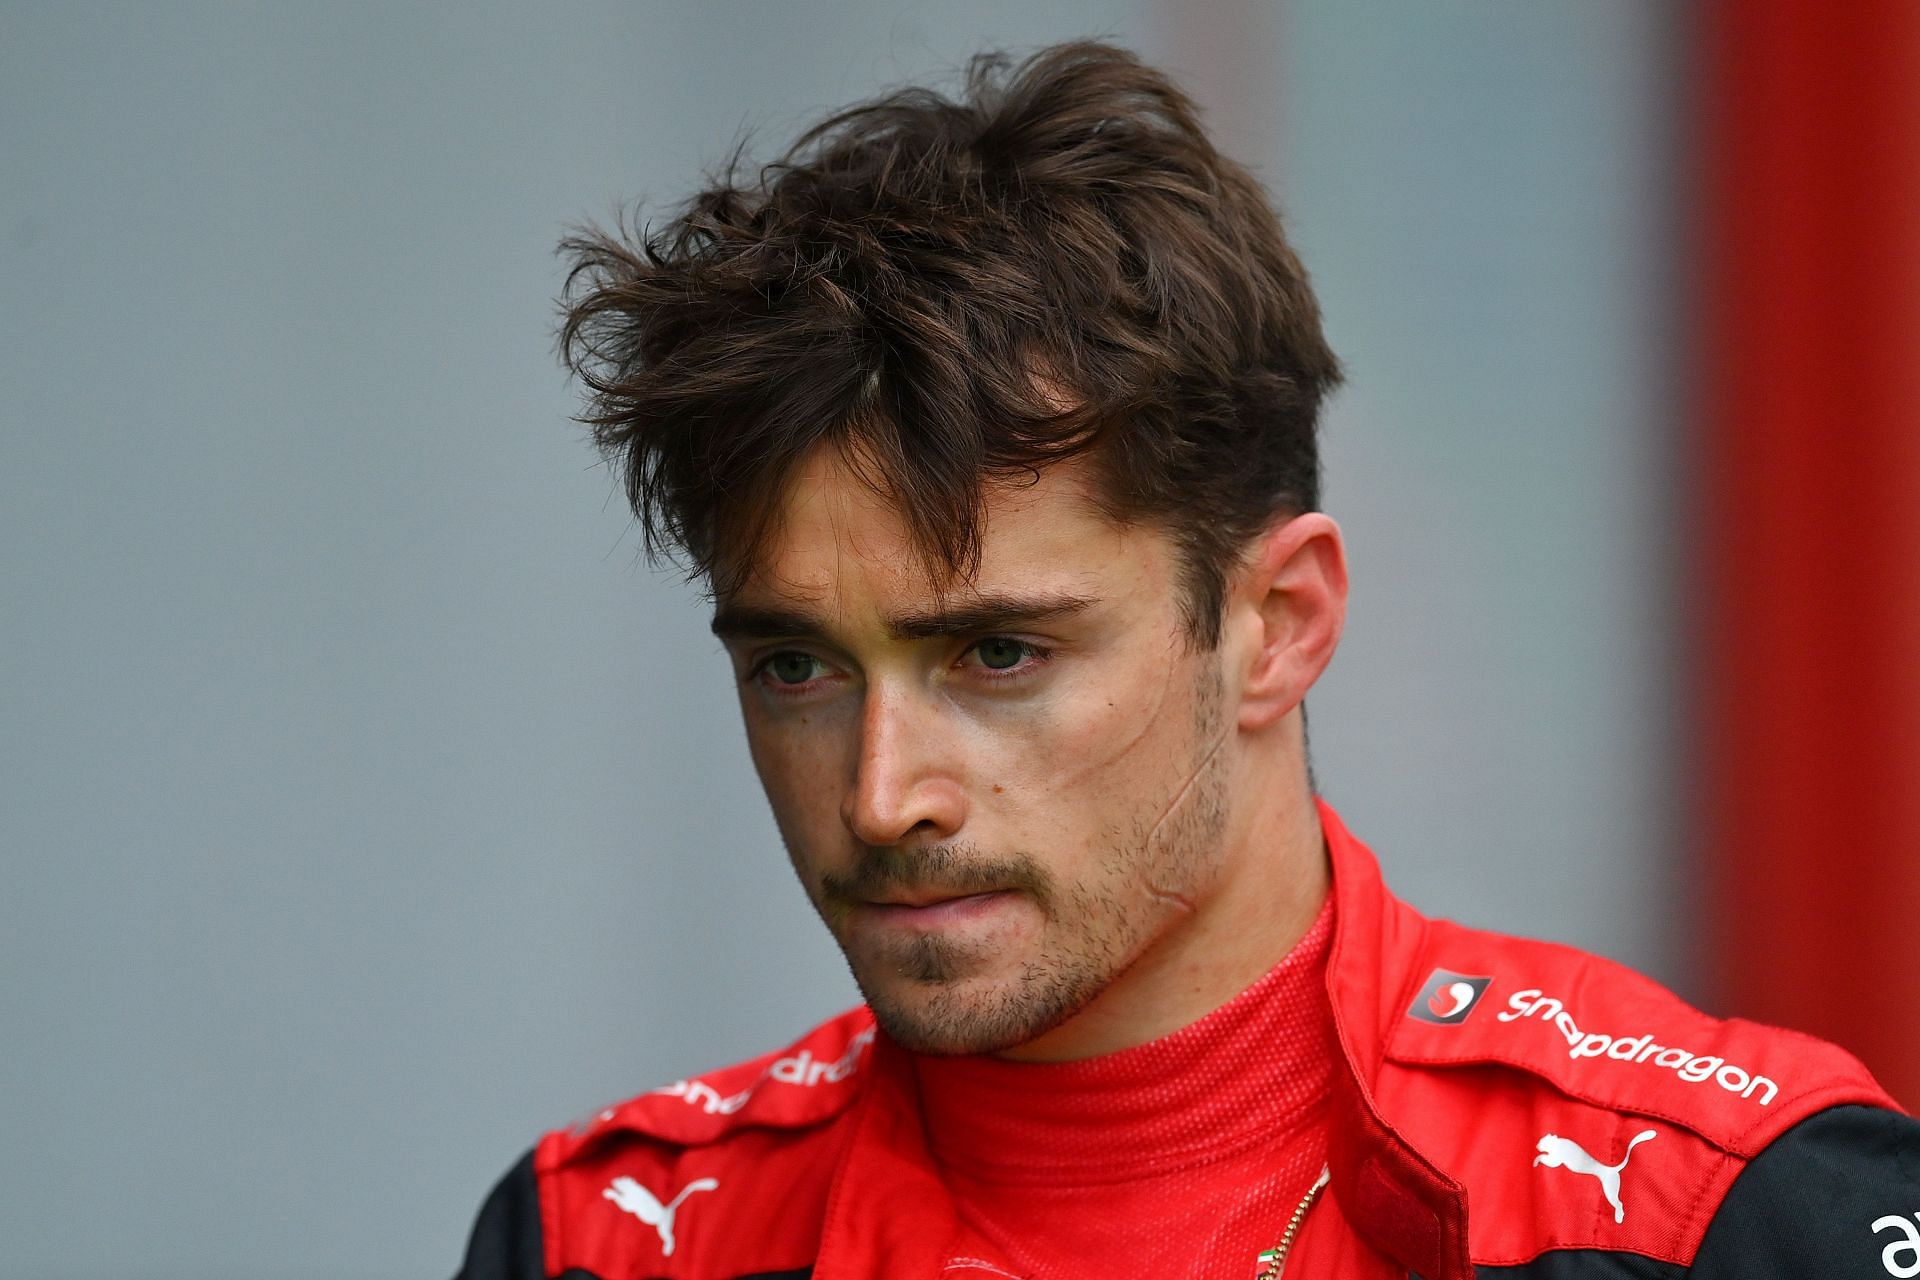 Charles Leclerc&#039;s bad start in Imola was down to wet patches on his side of the track